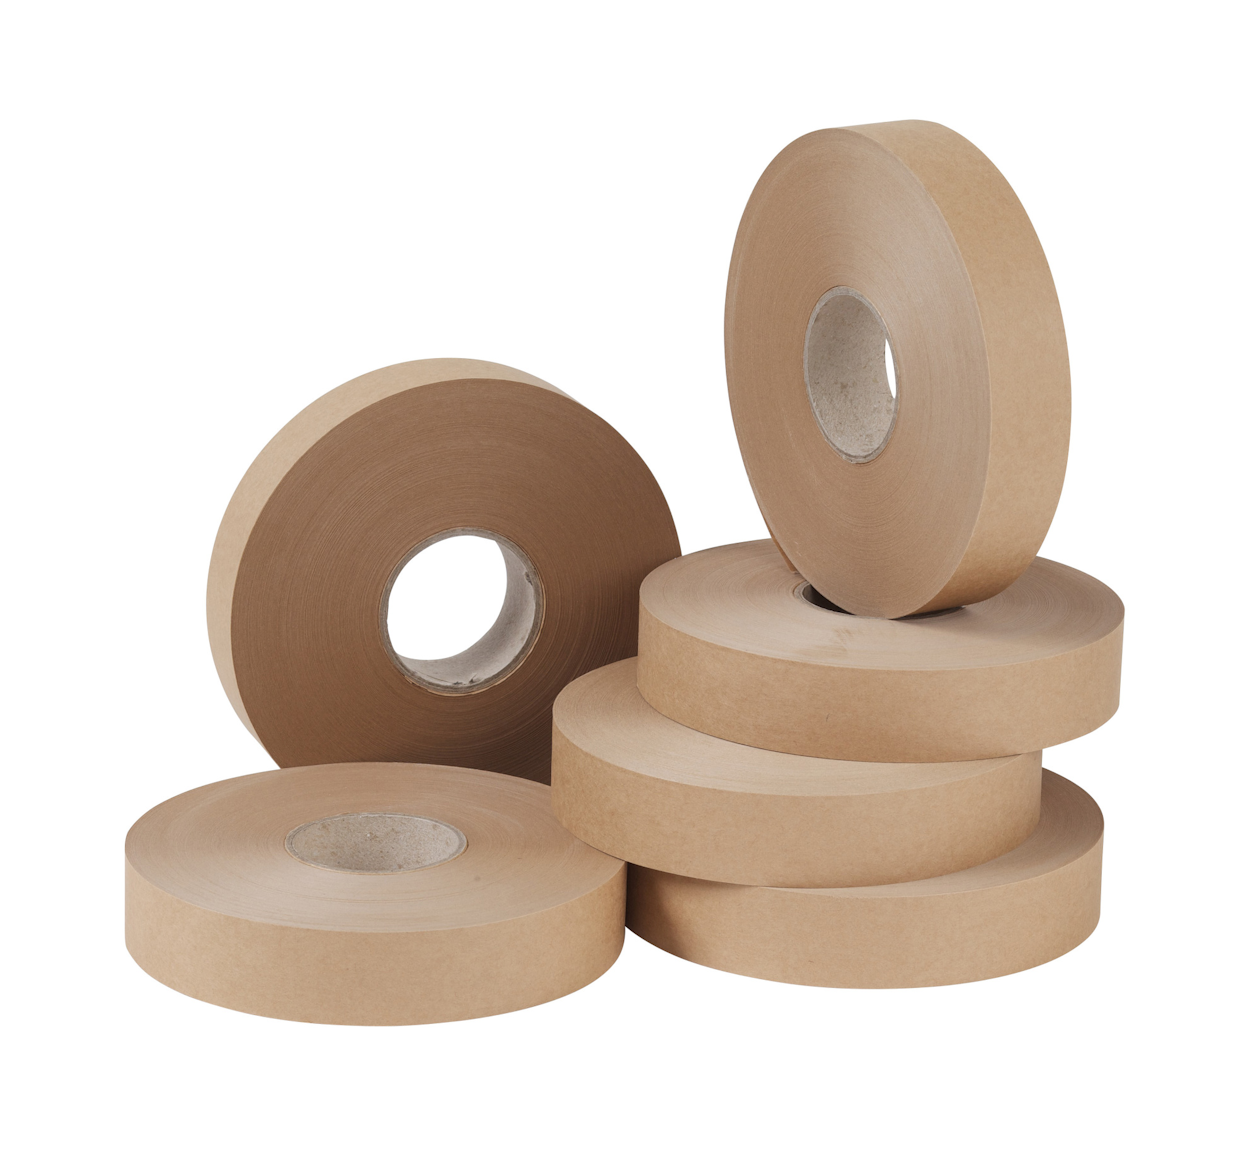 The Swiftpak Guide To Adhesive Tapes for Packaging